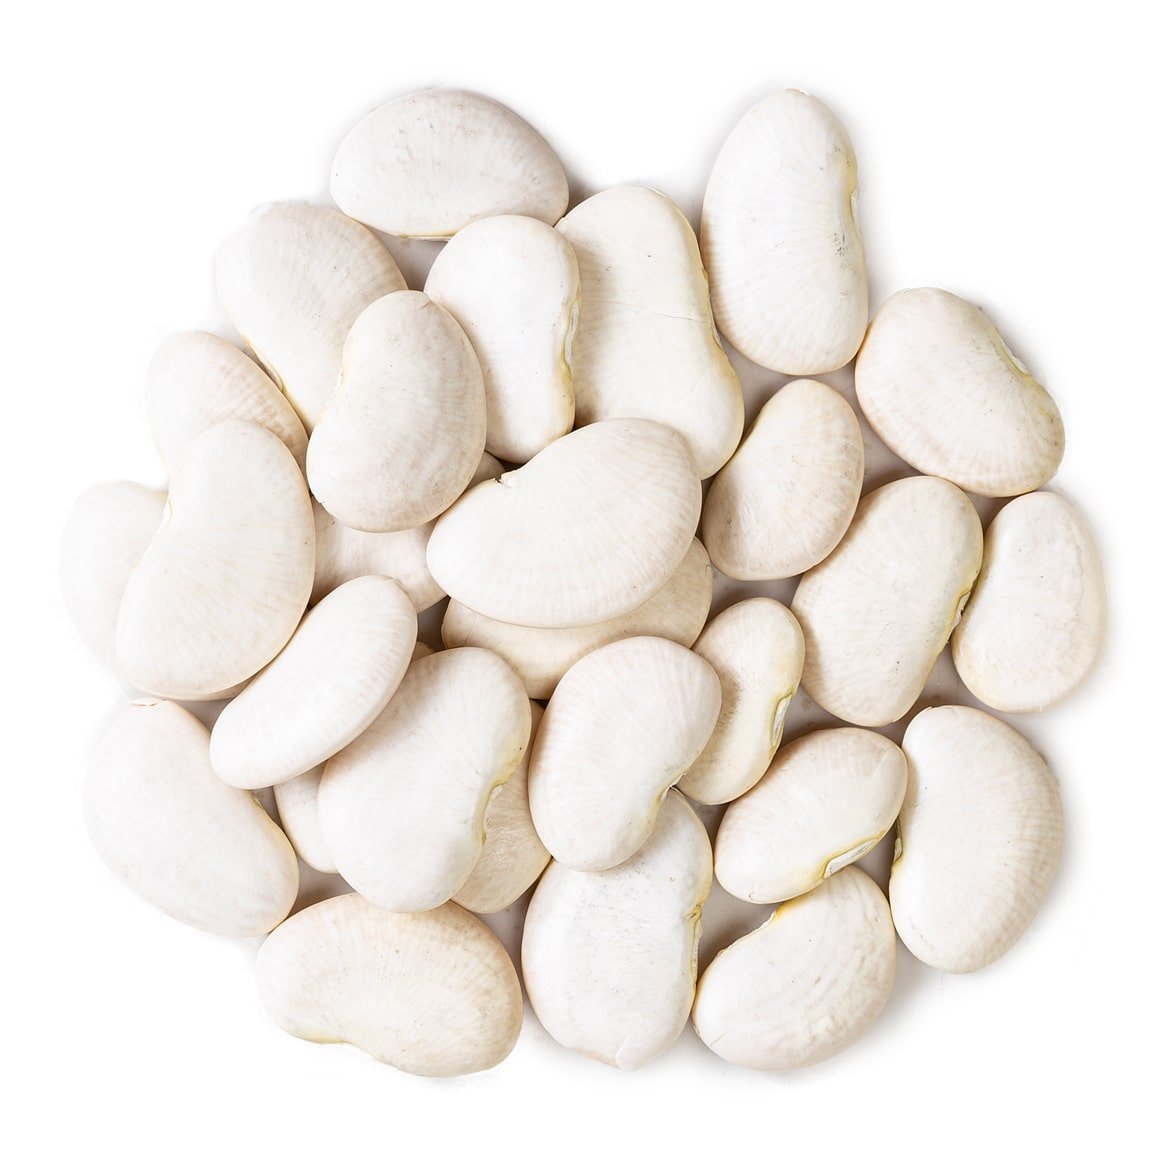 Lima Beans, Large Buy in Bulk from Food to Live